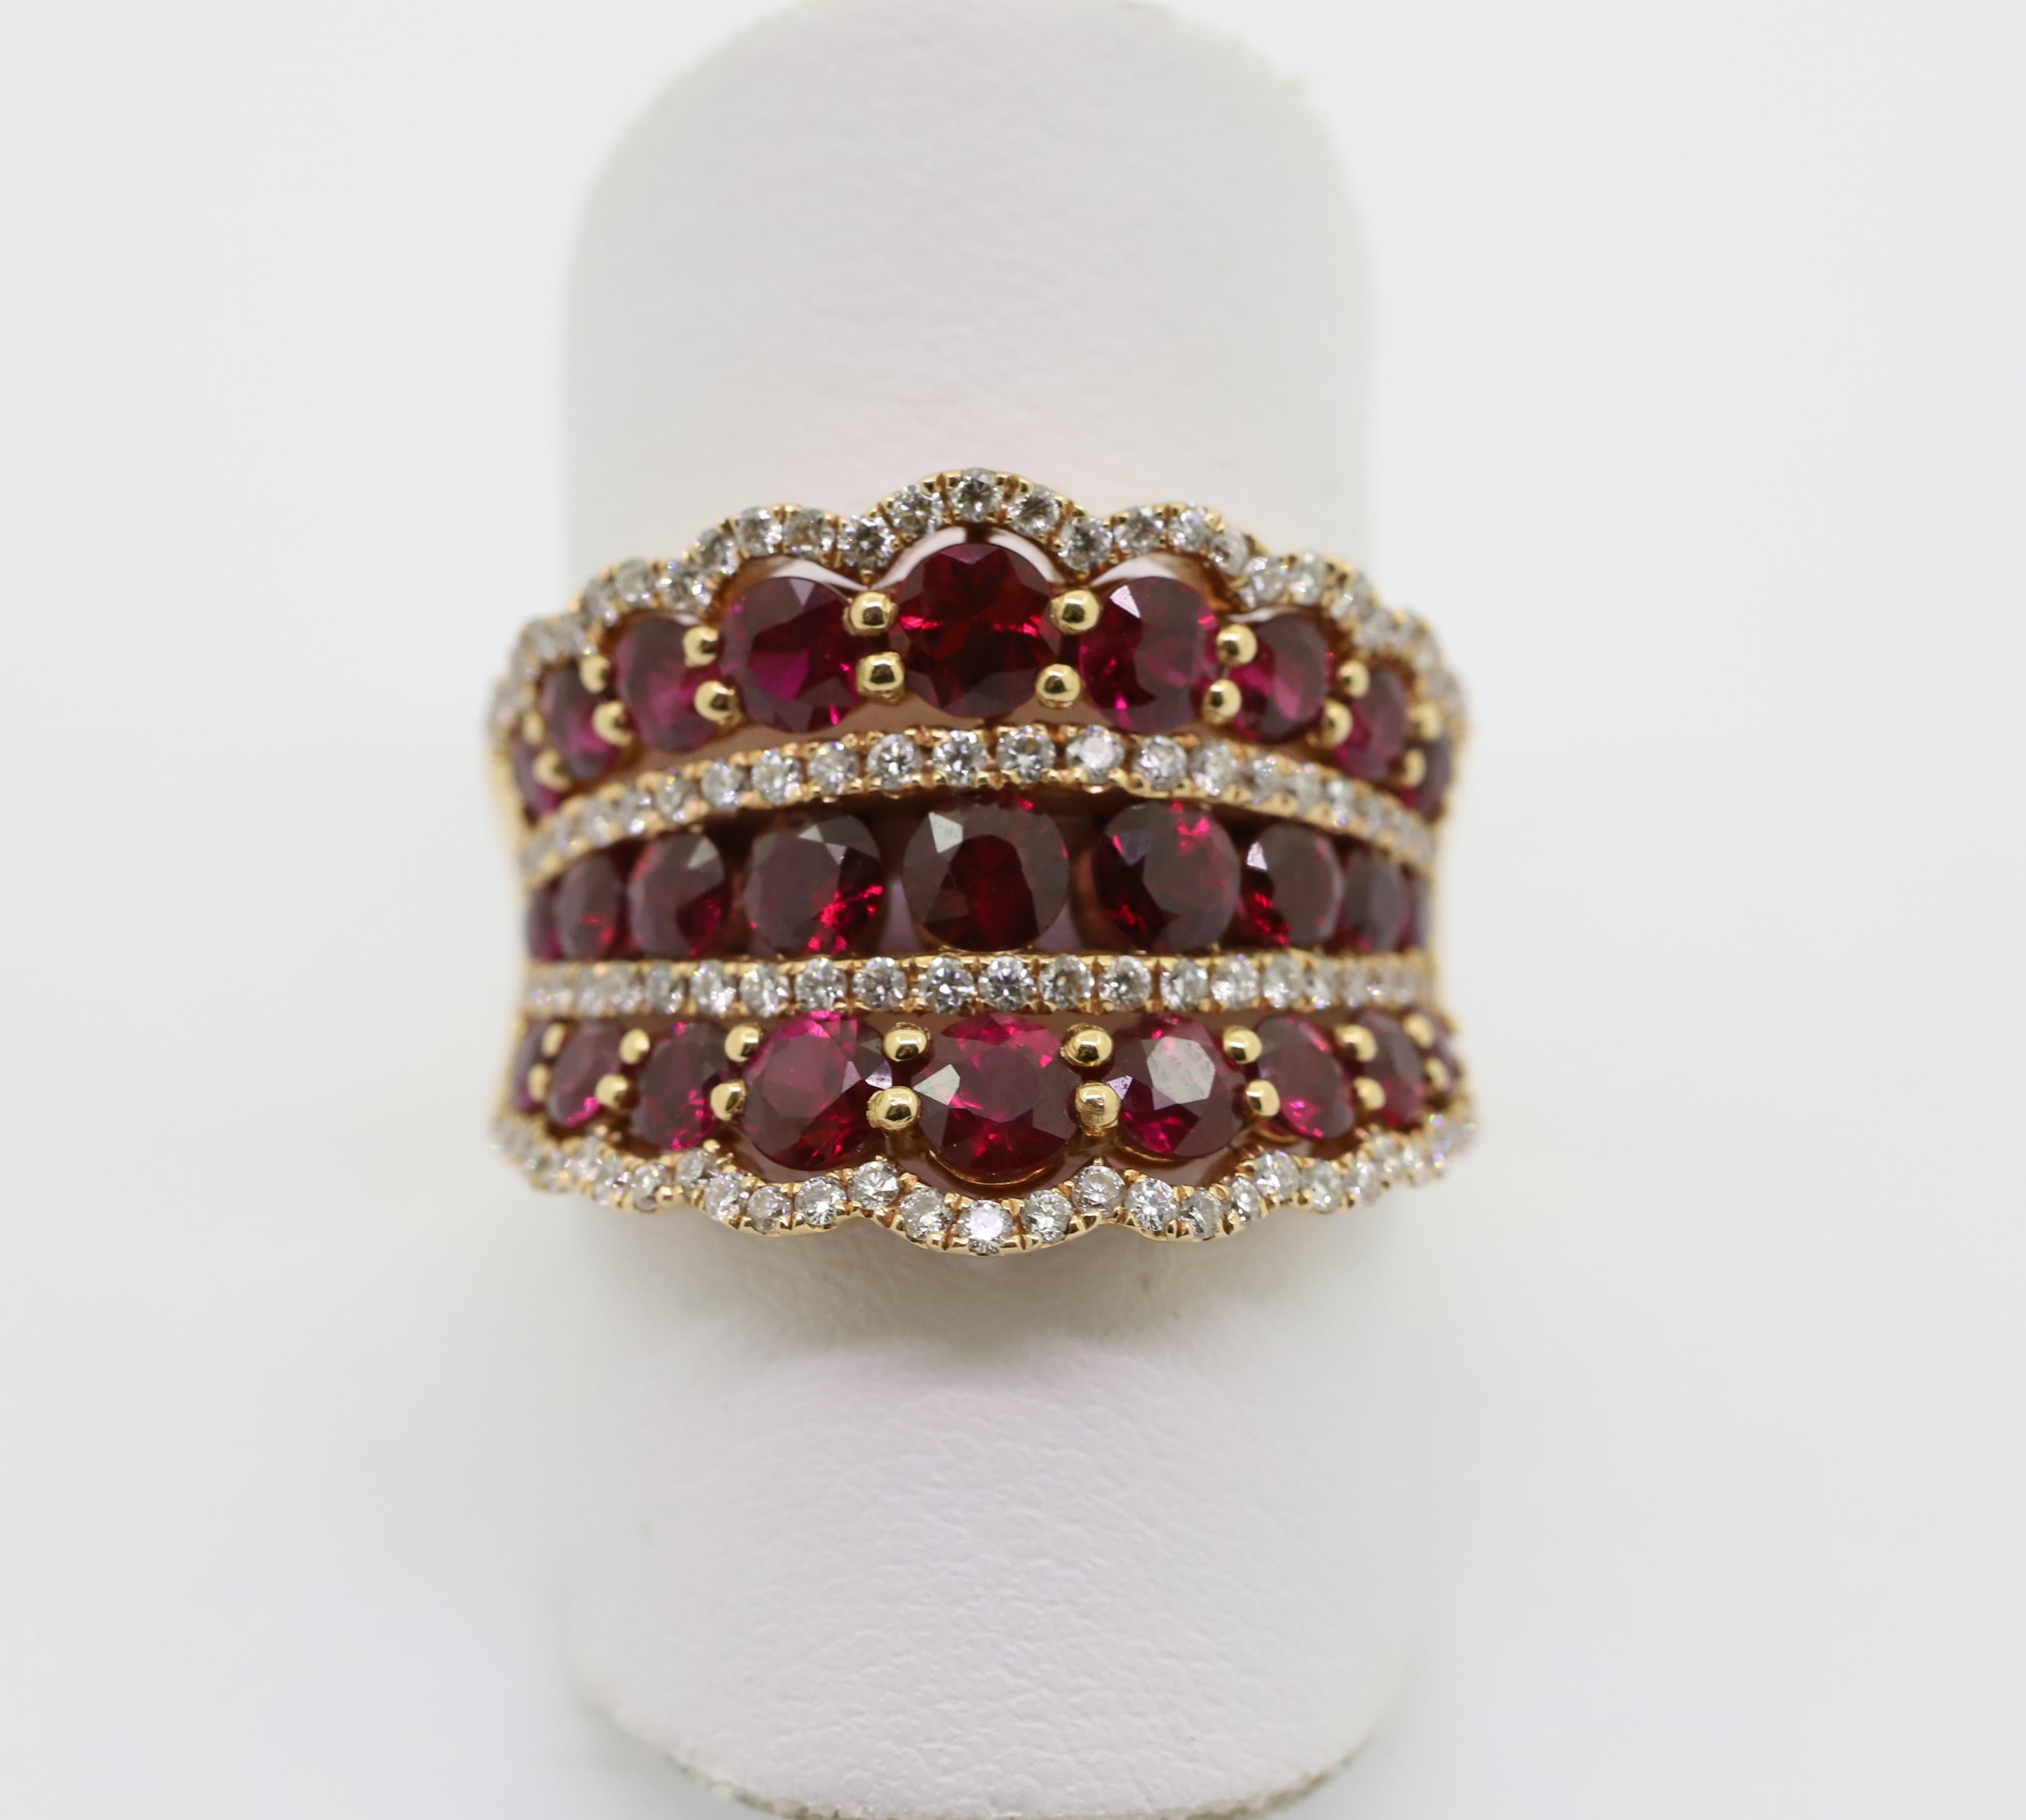 An elegant ring, whit 27 rubies 2.70 Carat separated to white diamonds for 0.49 Carat.
Ring in pink gold 18Kt.

Object made in Italy.